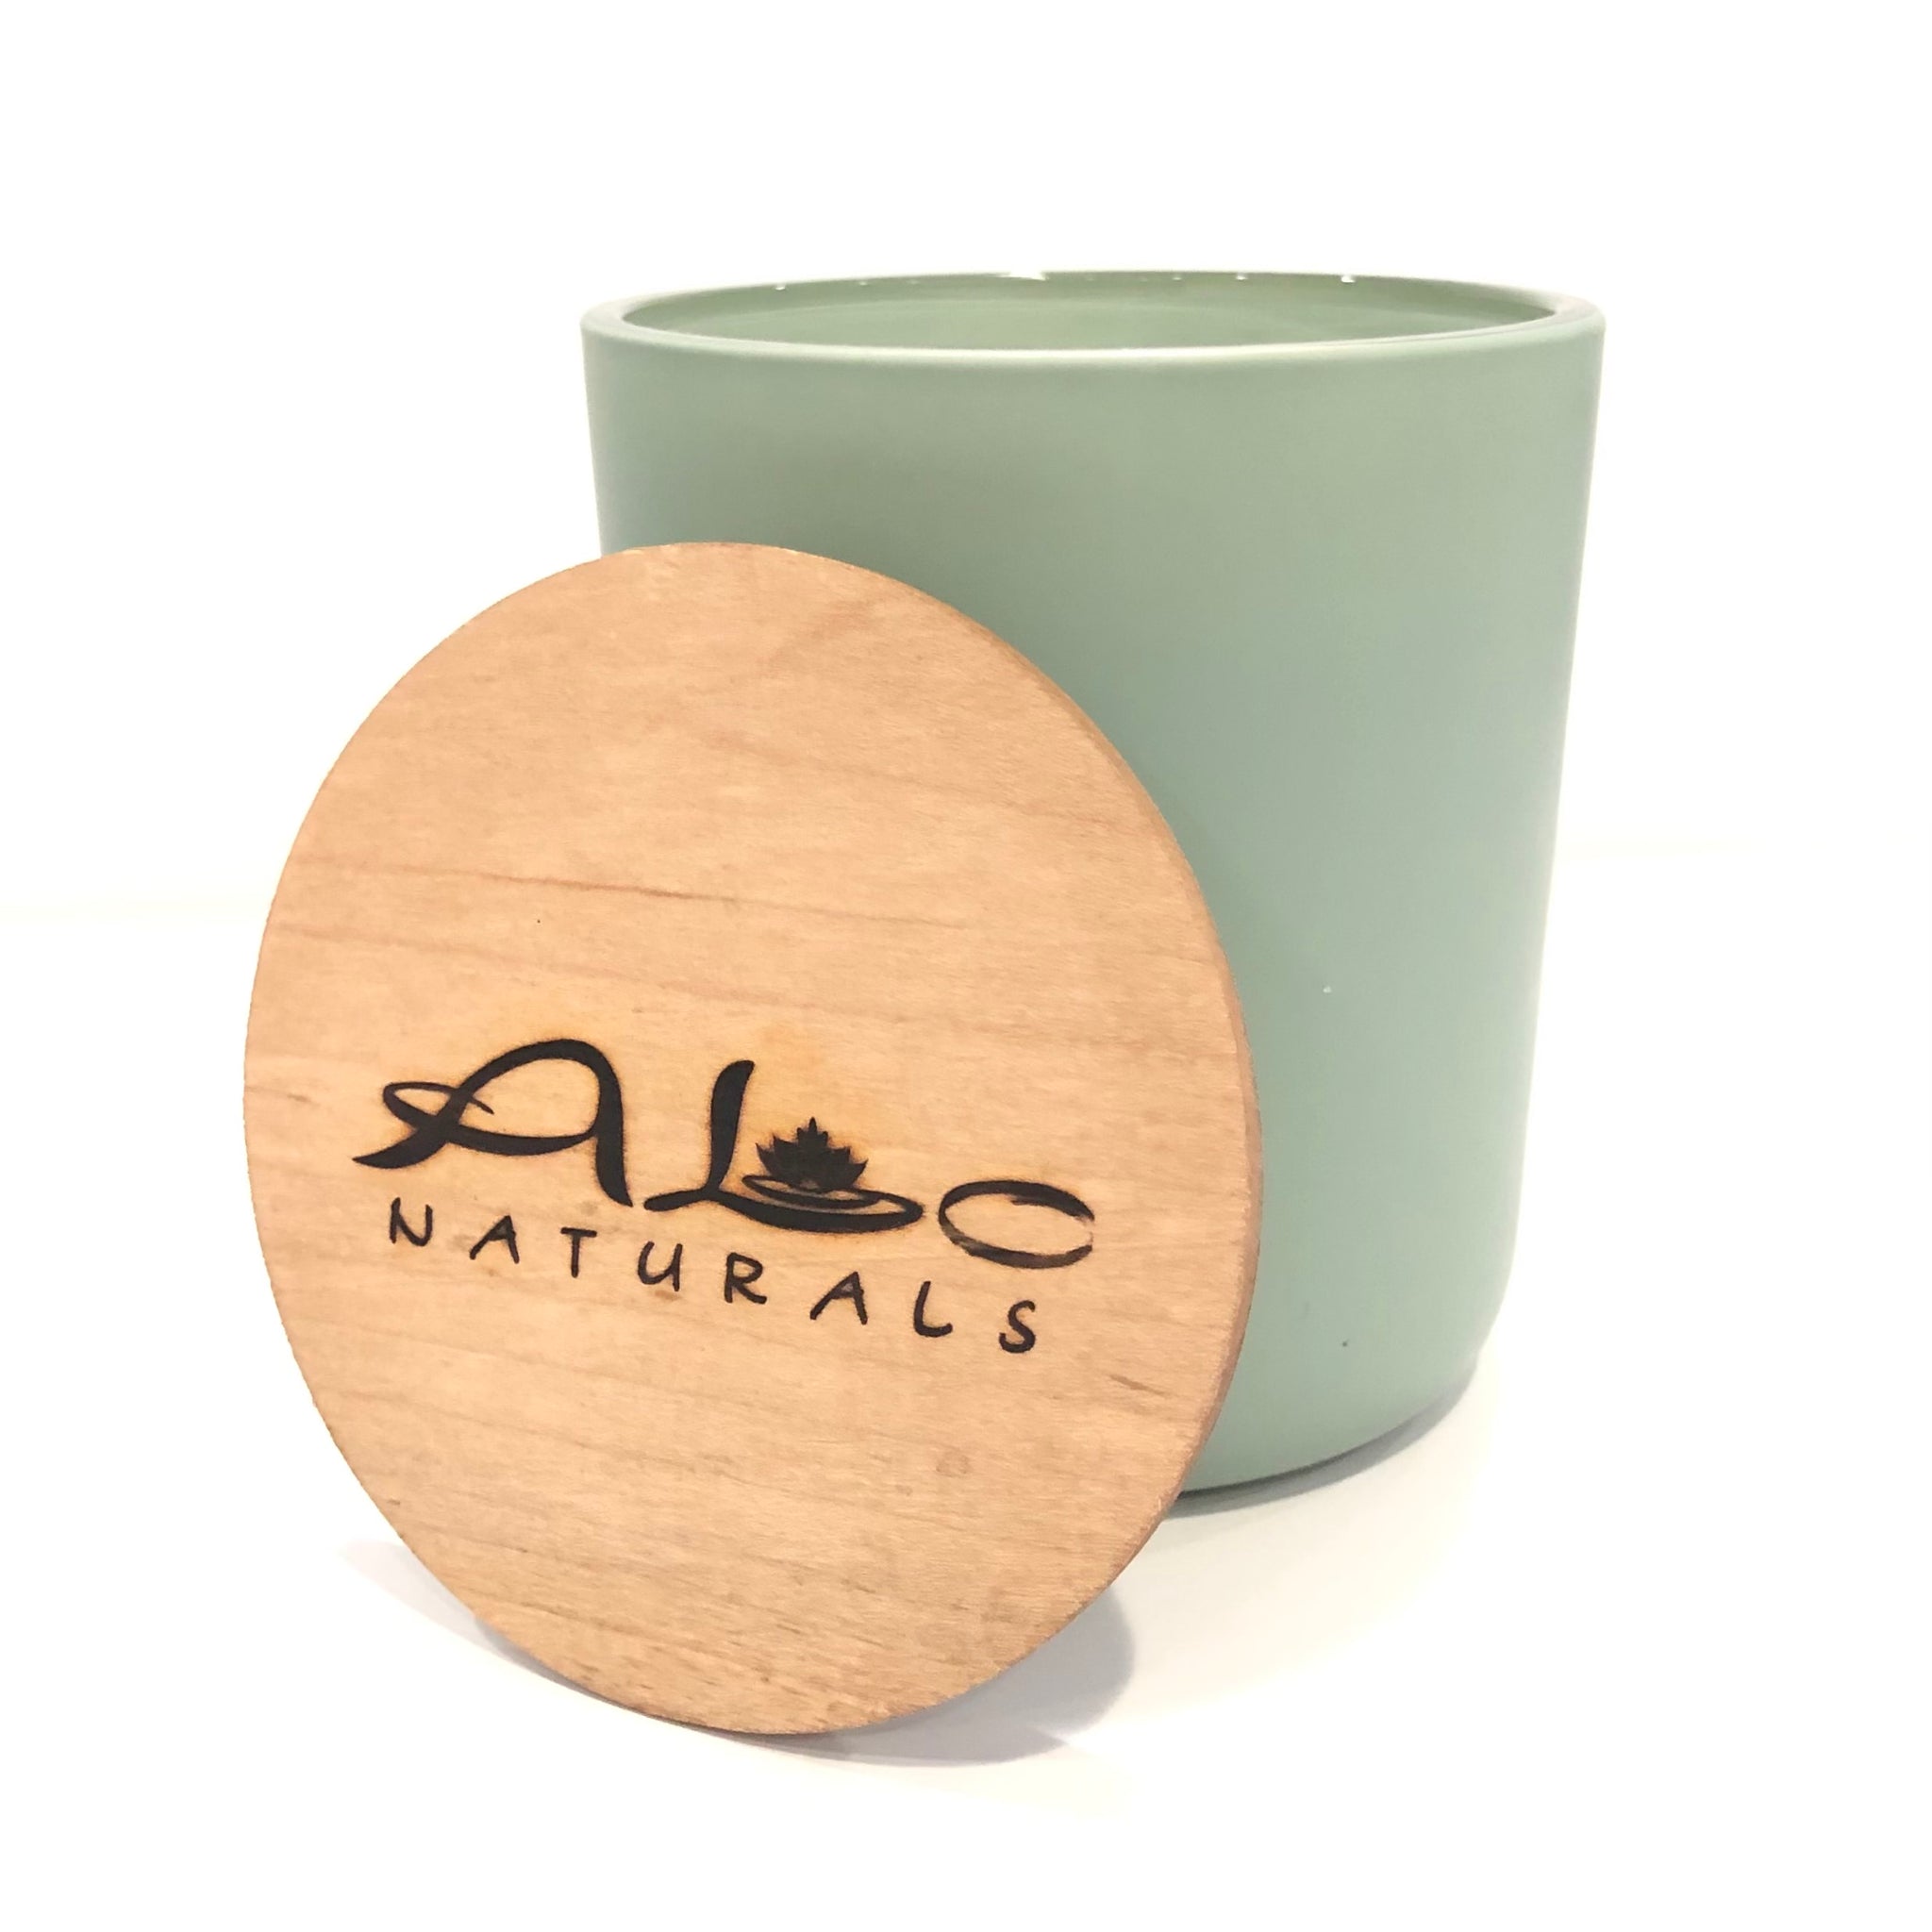 Hand poured Sage & Lavender scented soy candle.  Green painted glass vessel with wooden wick that crackles as it burns.  Includes a maple wood lid.  70 hours of burn time.